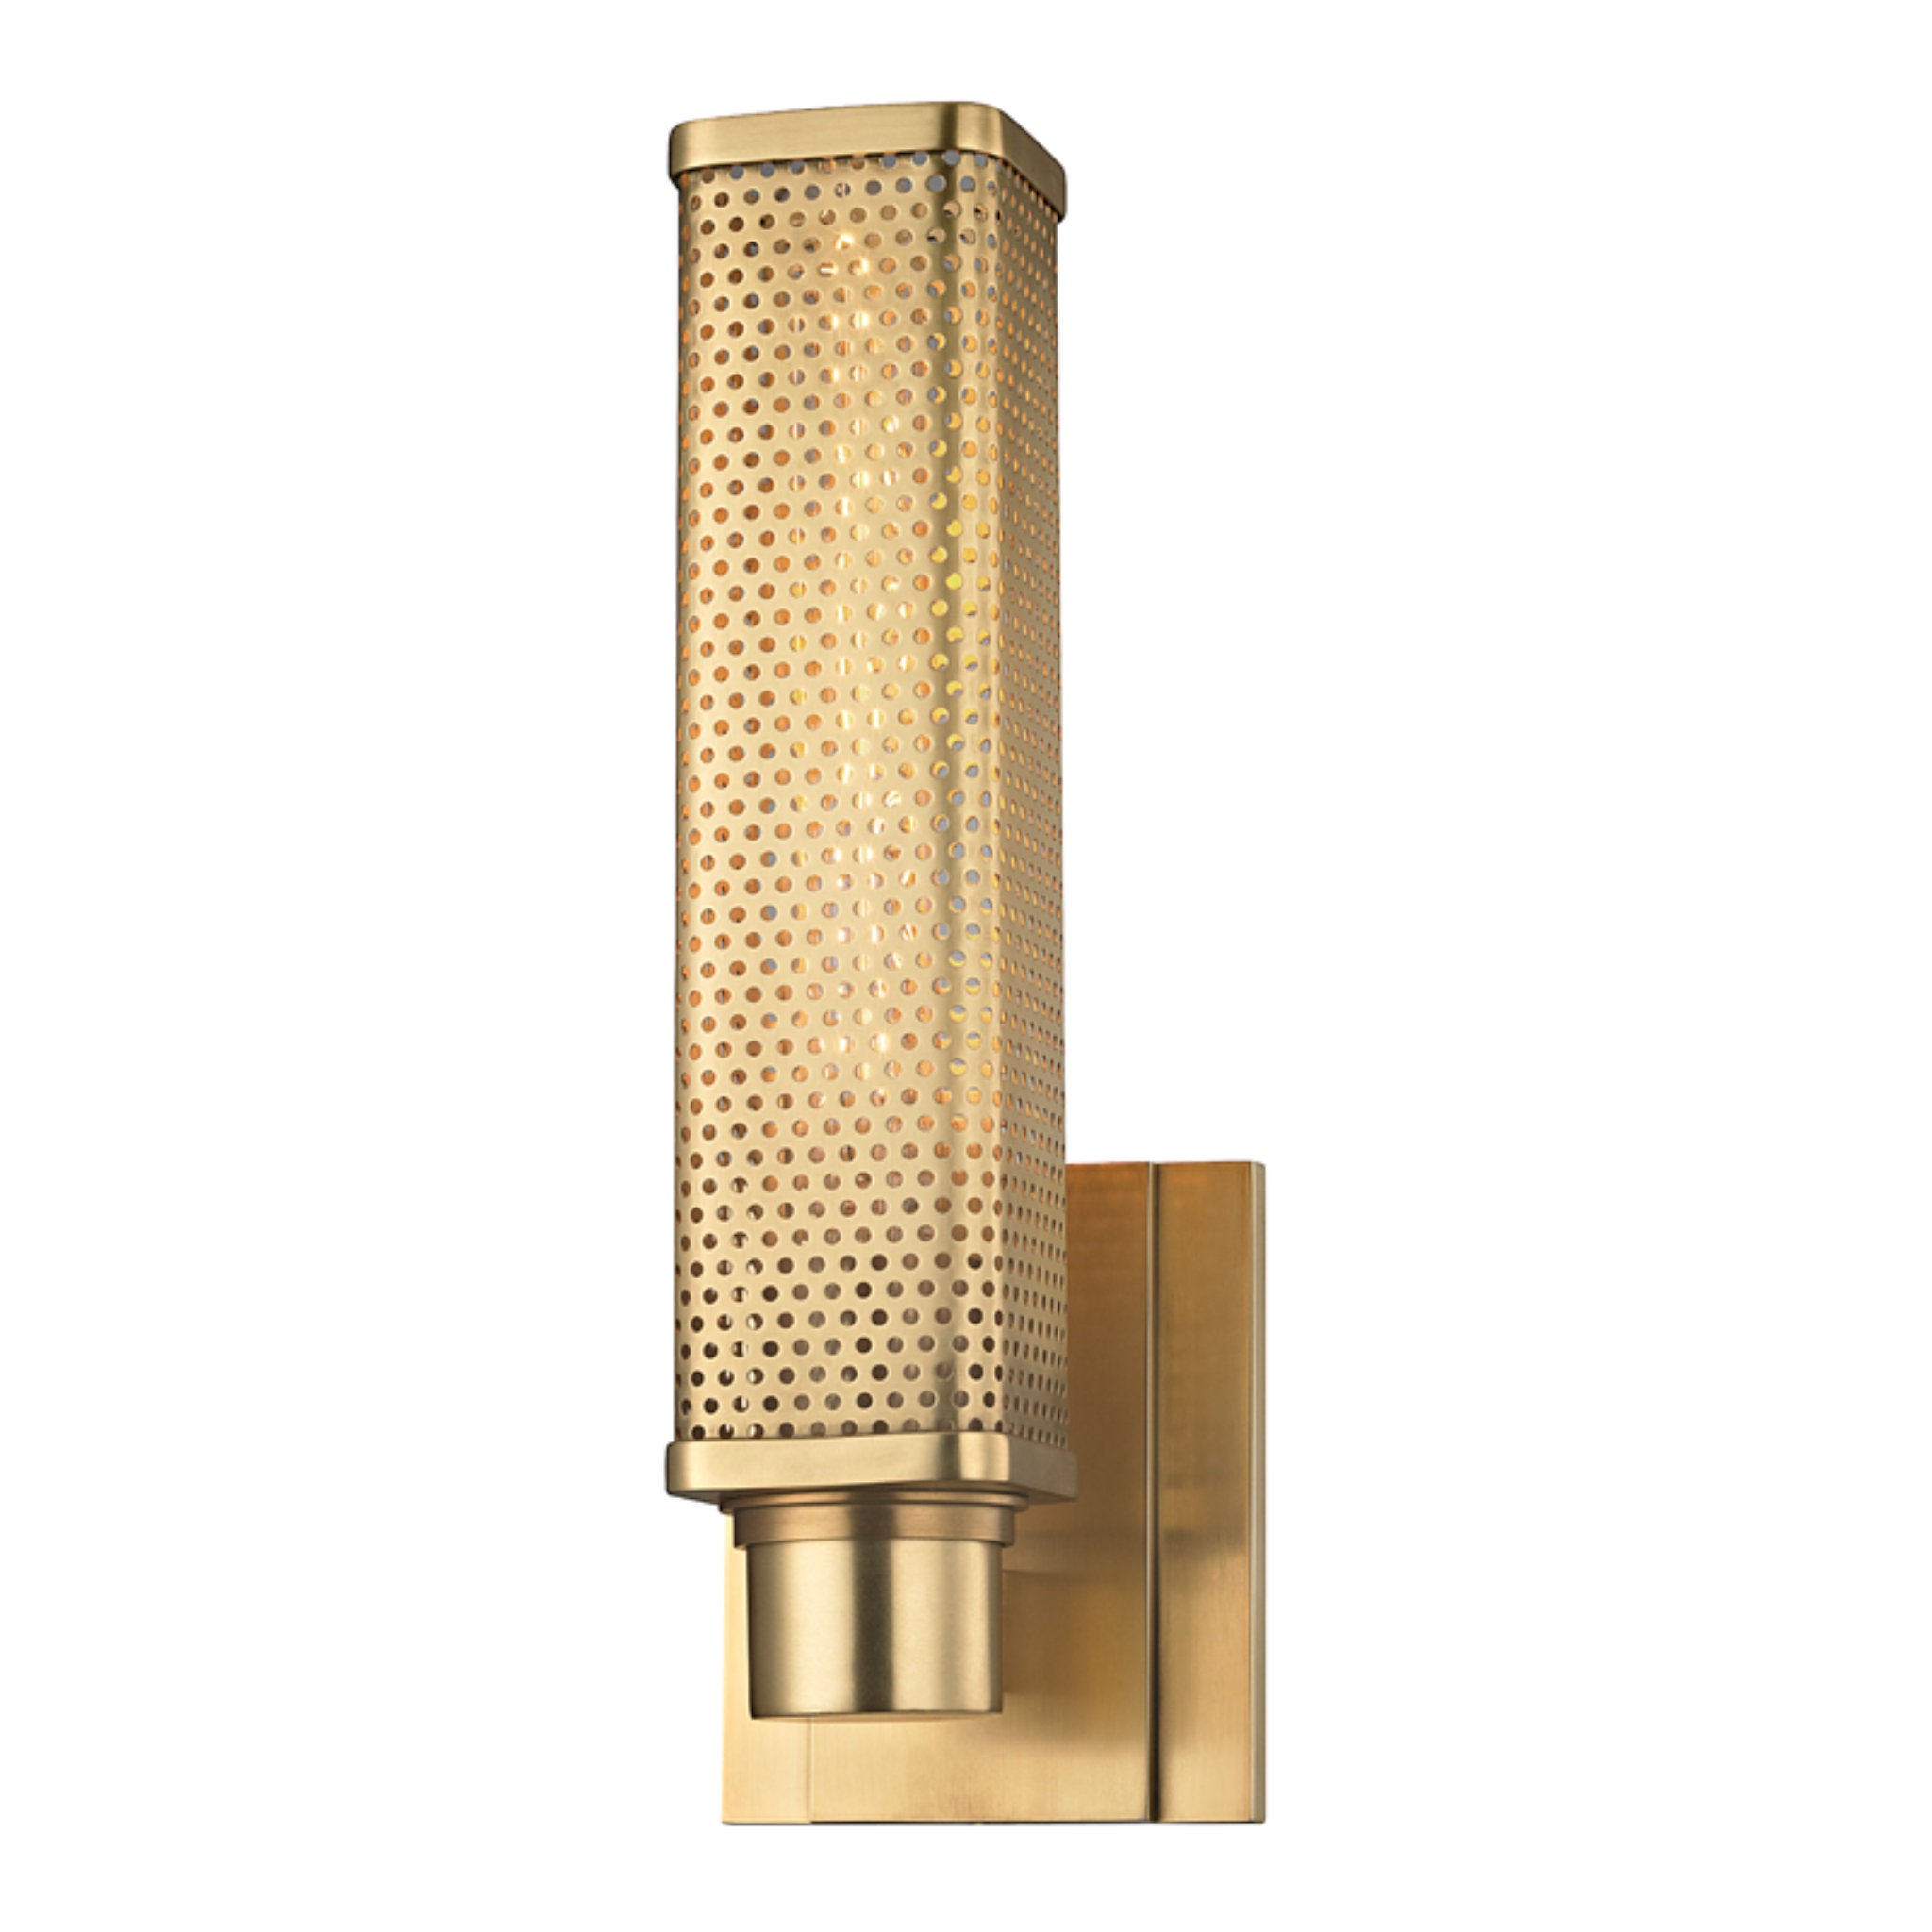 Gibbs 1 Light Wall Sconce in Aged Brass